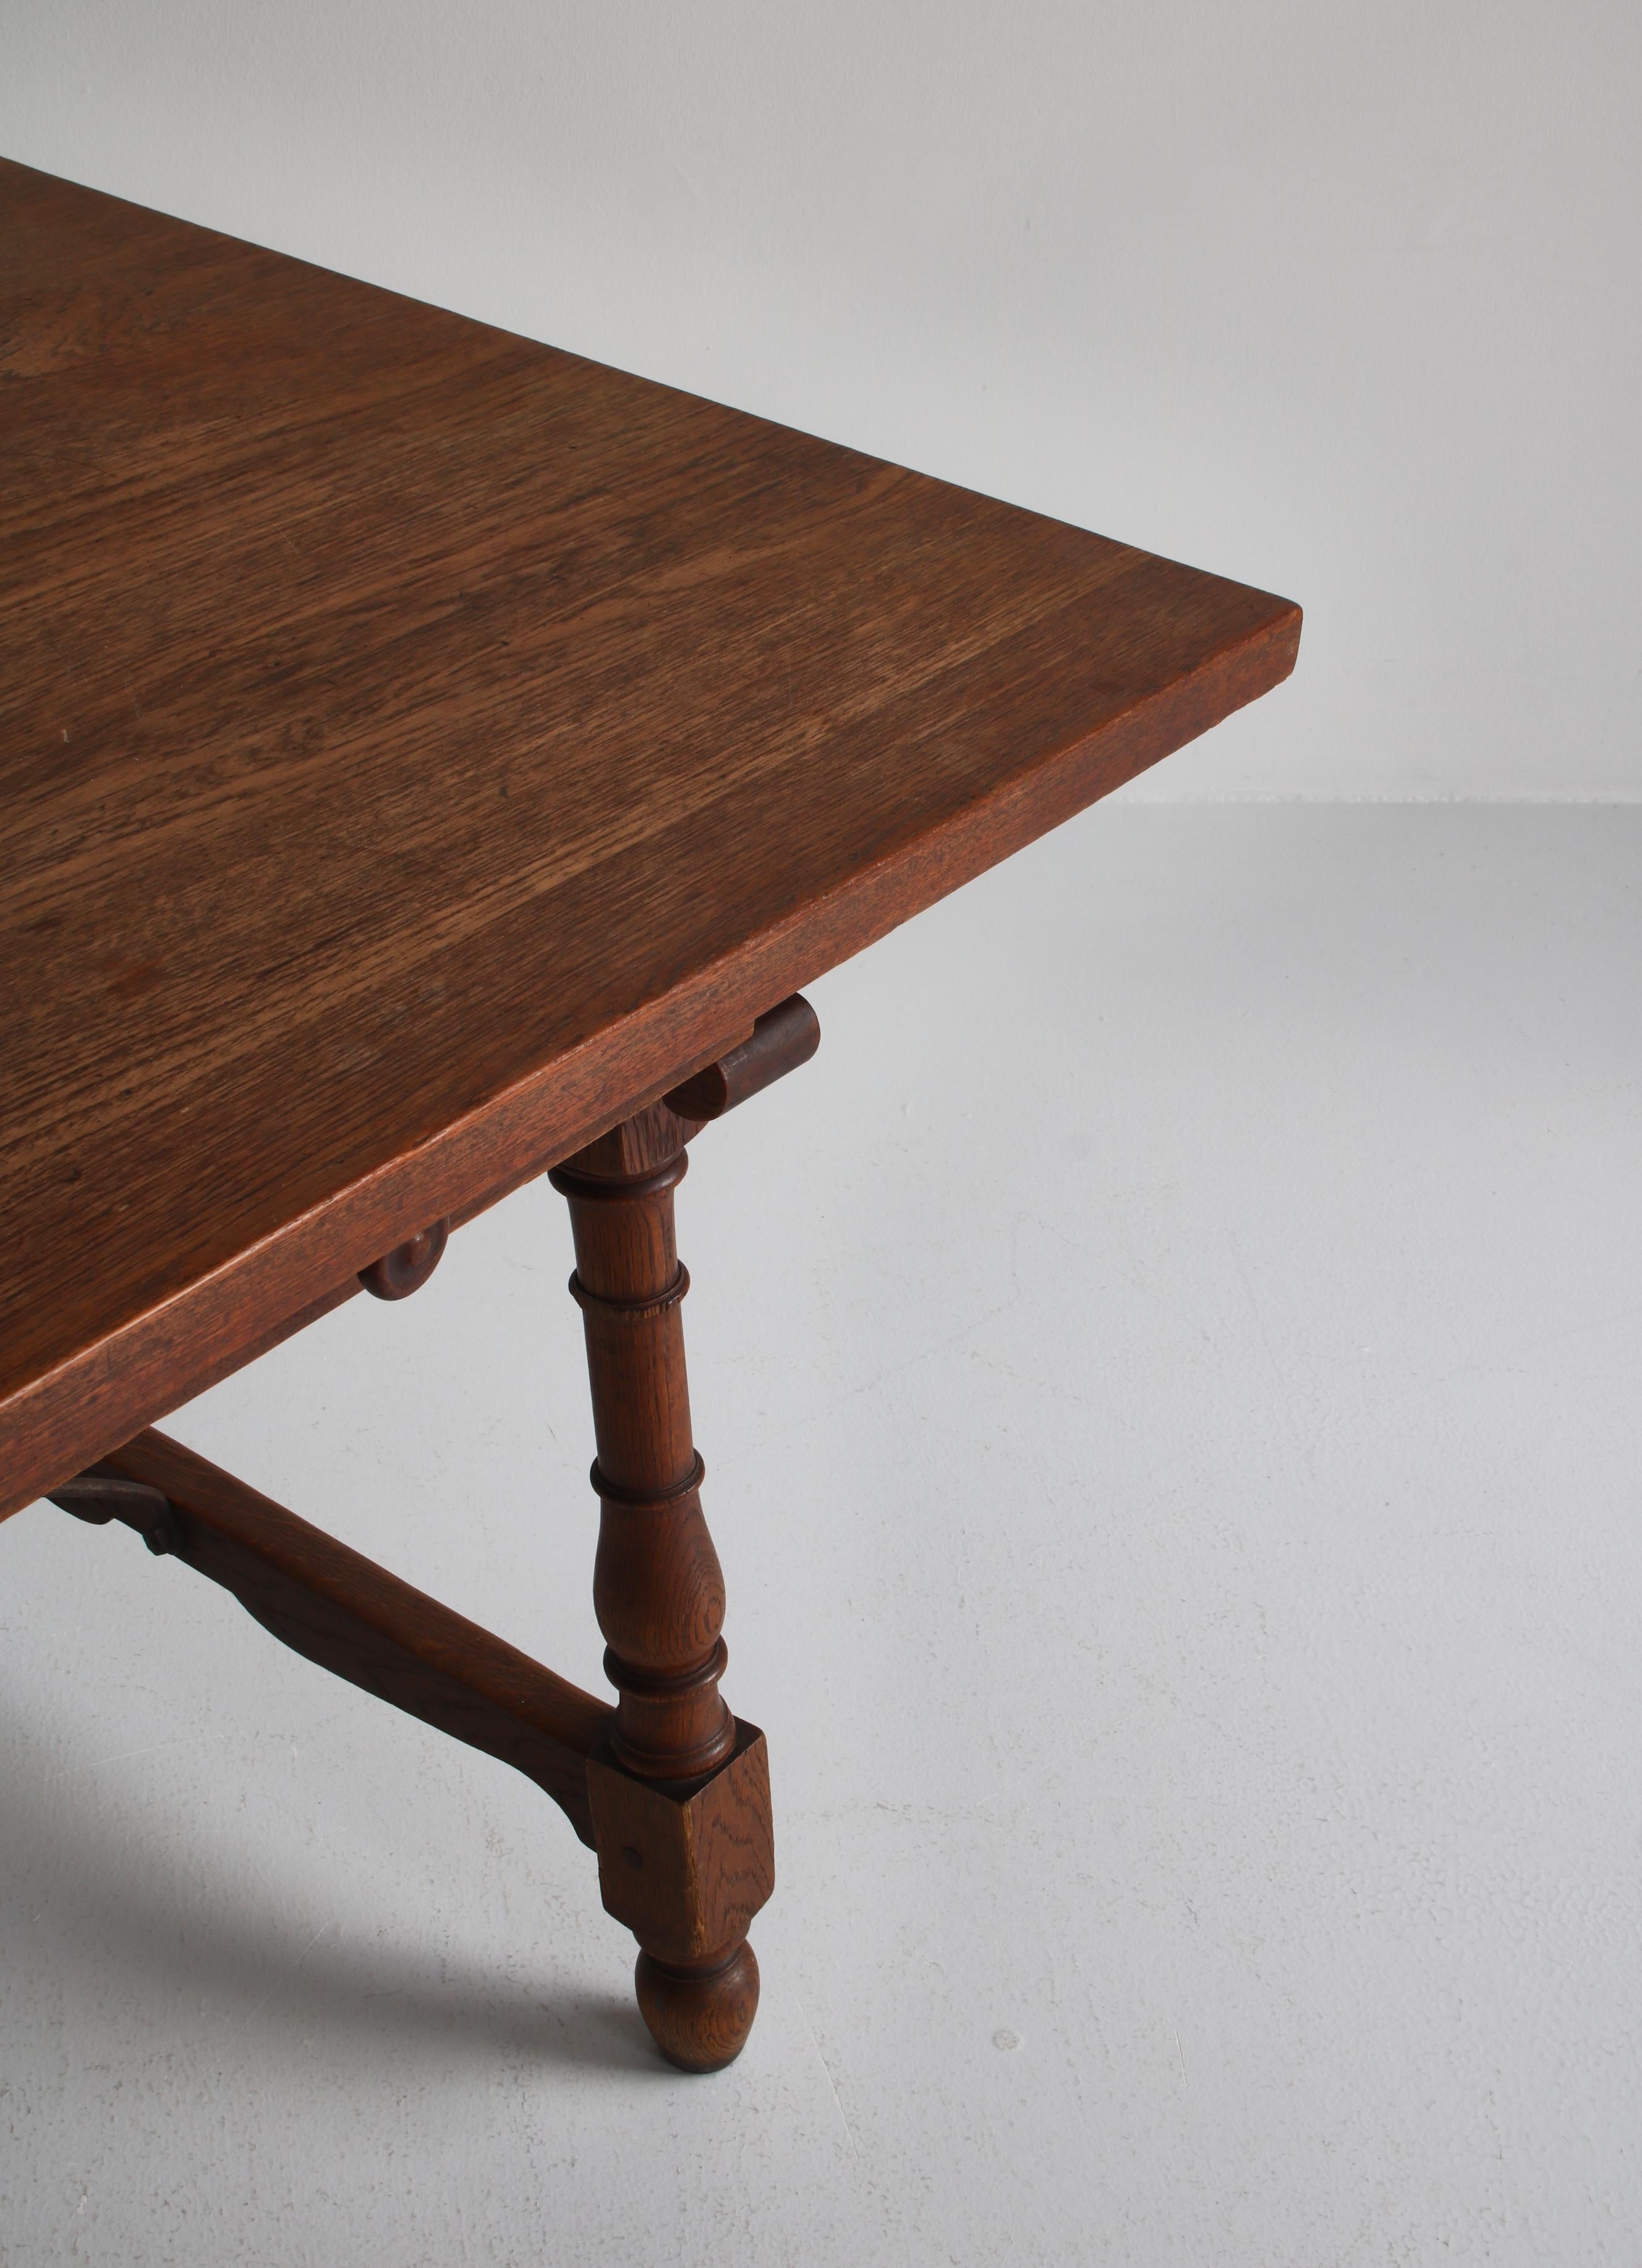 Mid-20th Century Unique Desk or Table Made by Jens Harald Quistgaard in 1953, Solid Teak and Oak For Sale